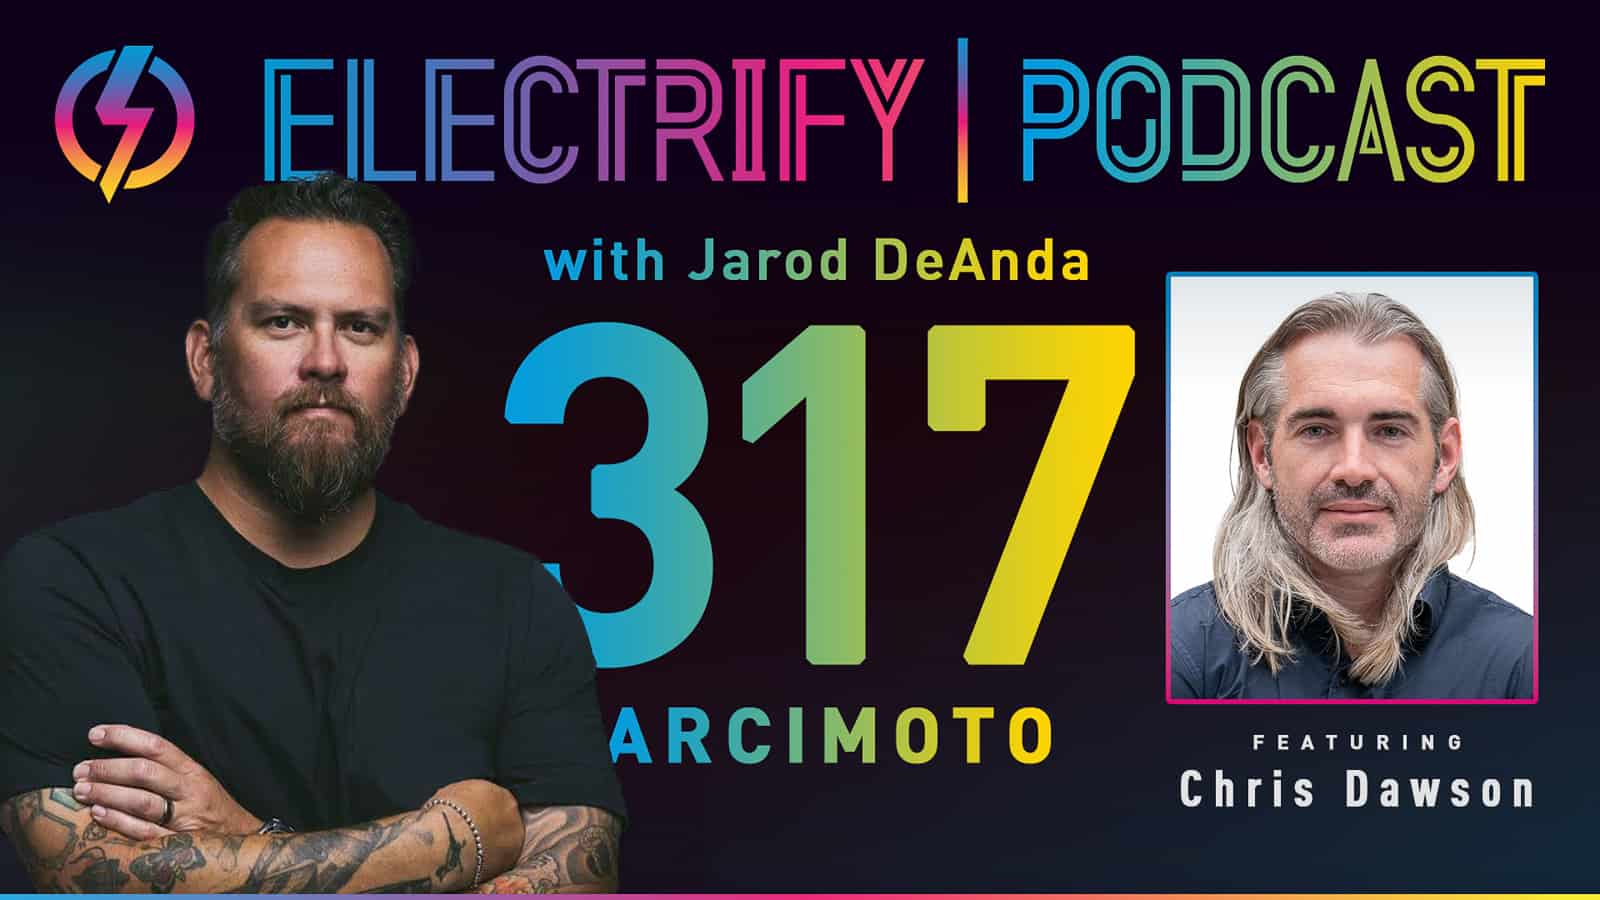 Electrify Podcast episode 317 with host Jarod DeAnda and guest Chris Dawson, CEO of Arcimoto